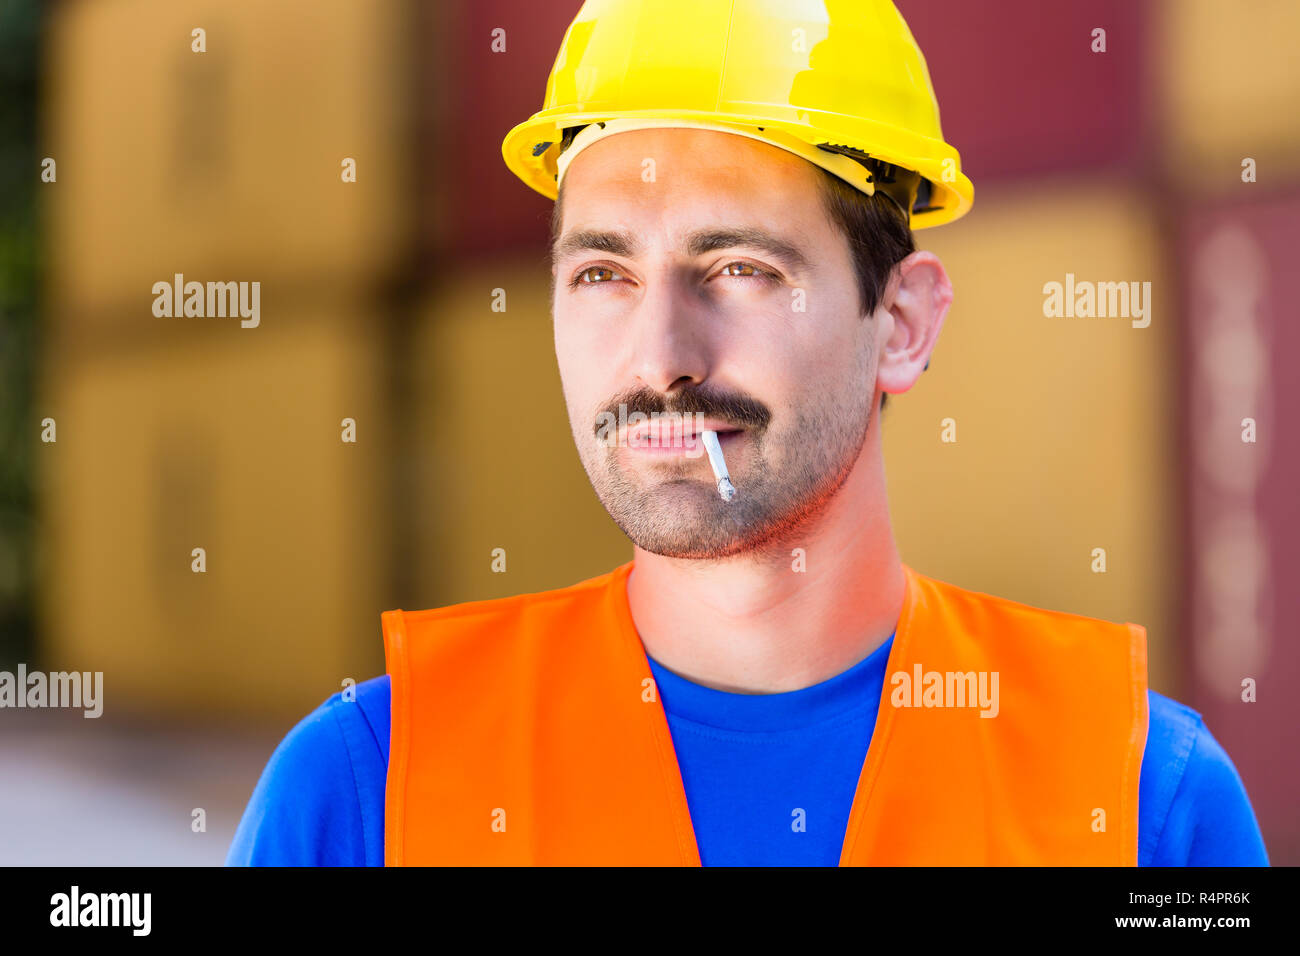 Smoking worker in logistics company with cigarette Stock Photo